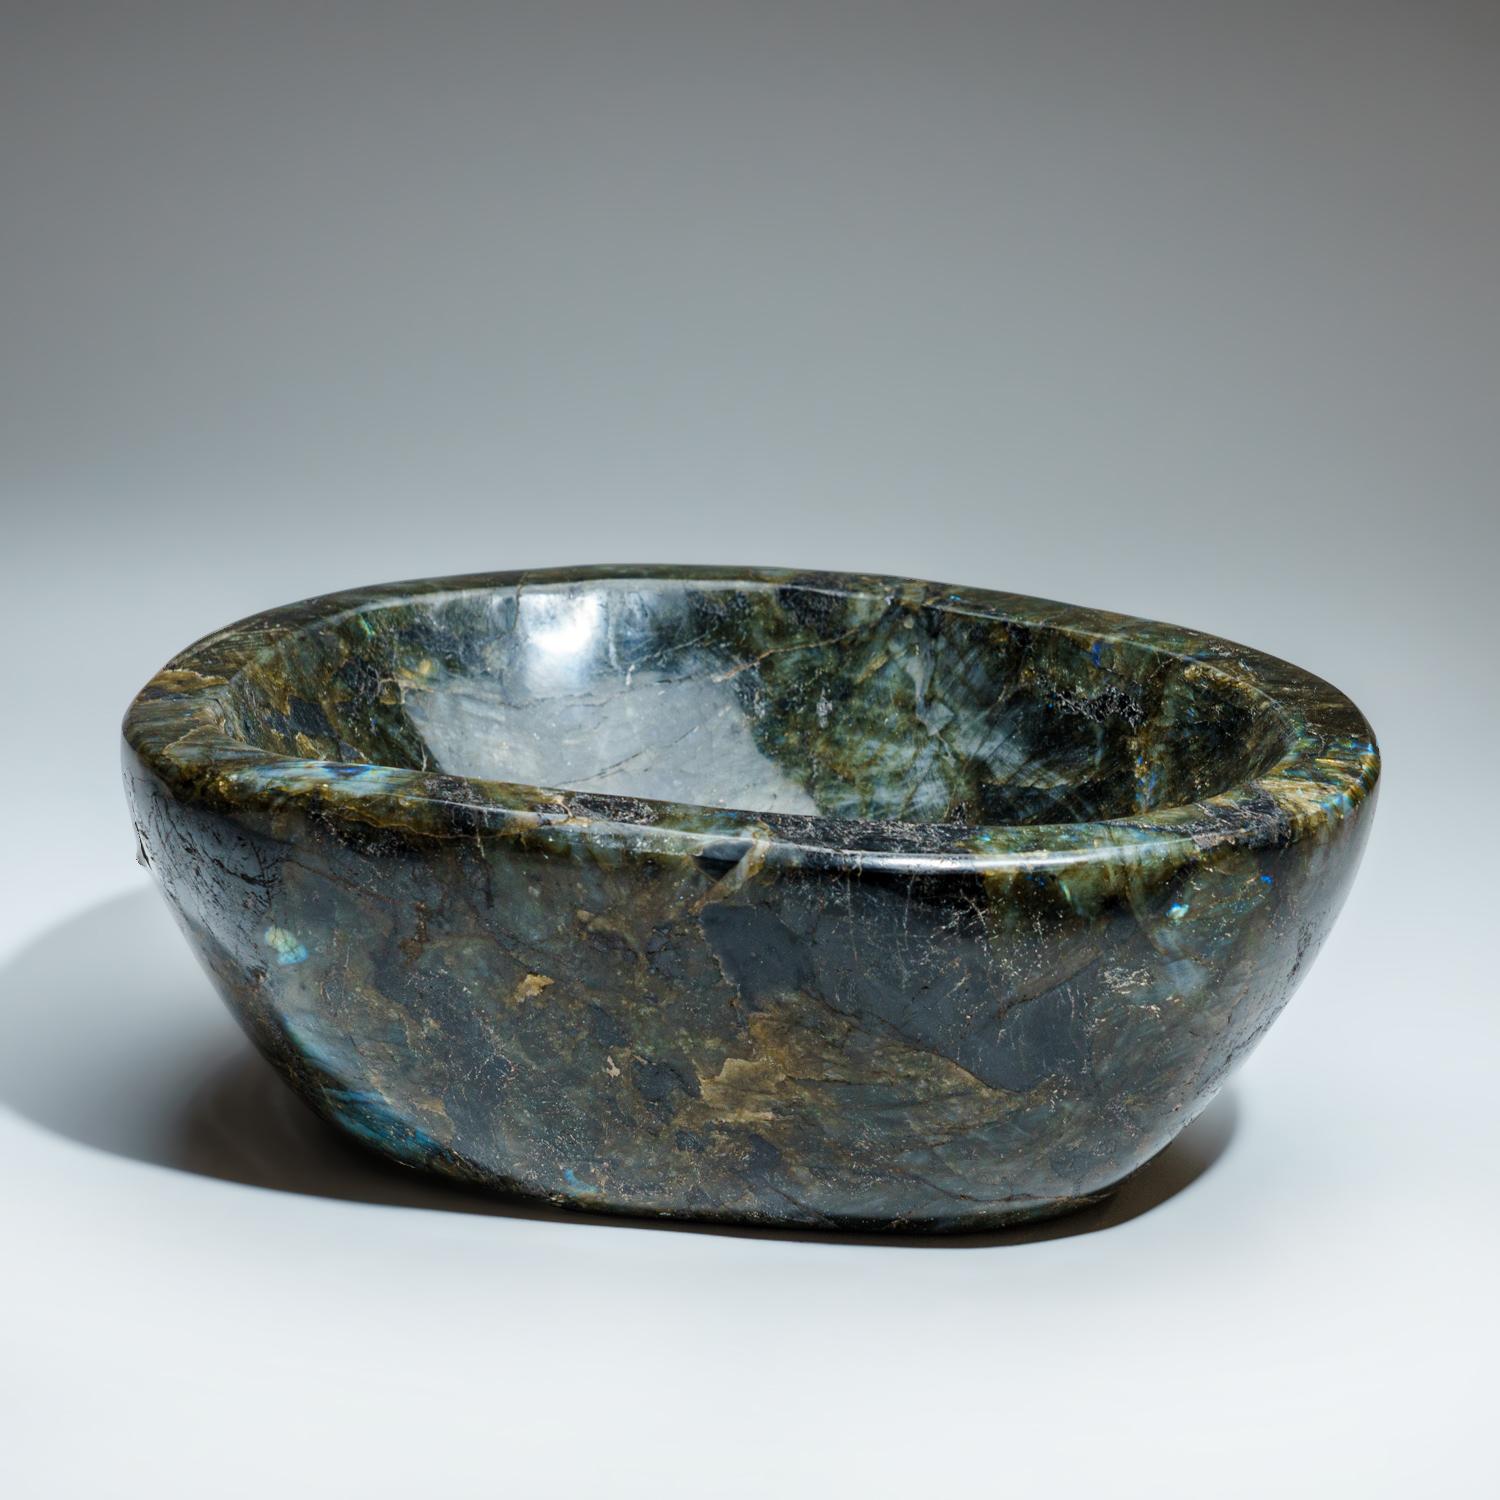 Genuine Polished Labradorite Large Bowl from Madagascar (21 lbs) In Excellent Condition For Sale In New York, NY